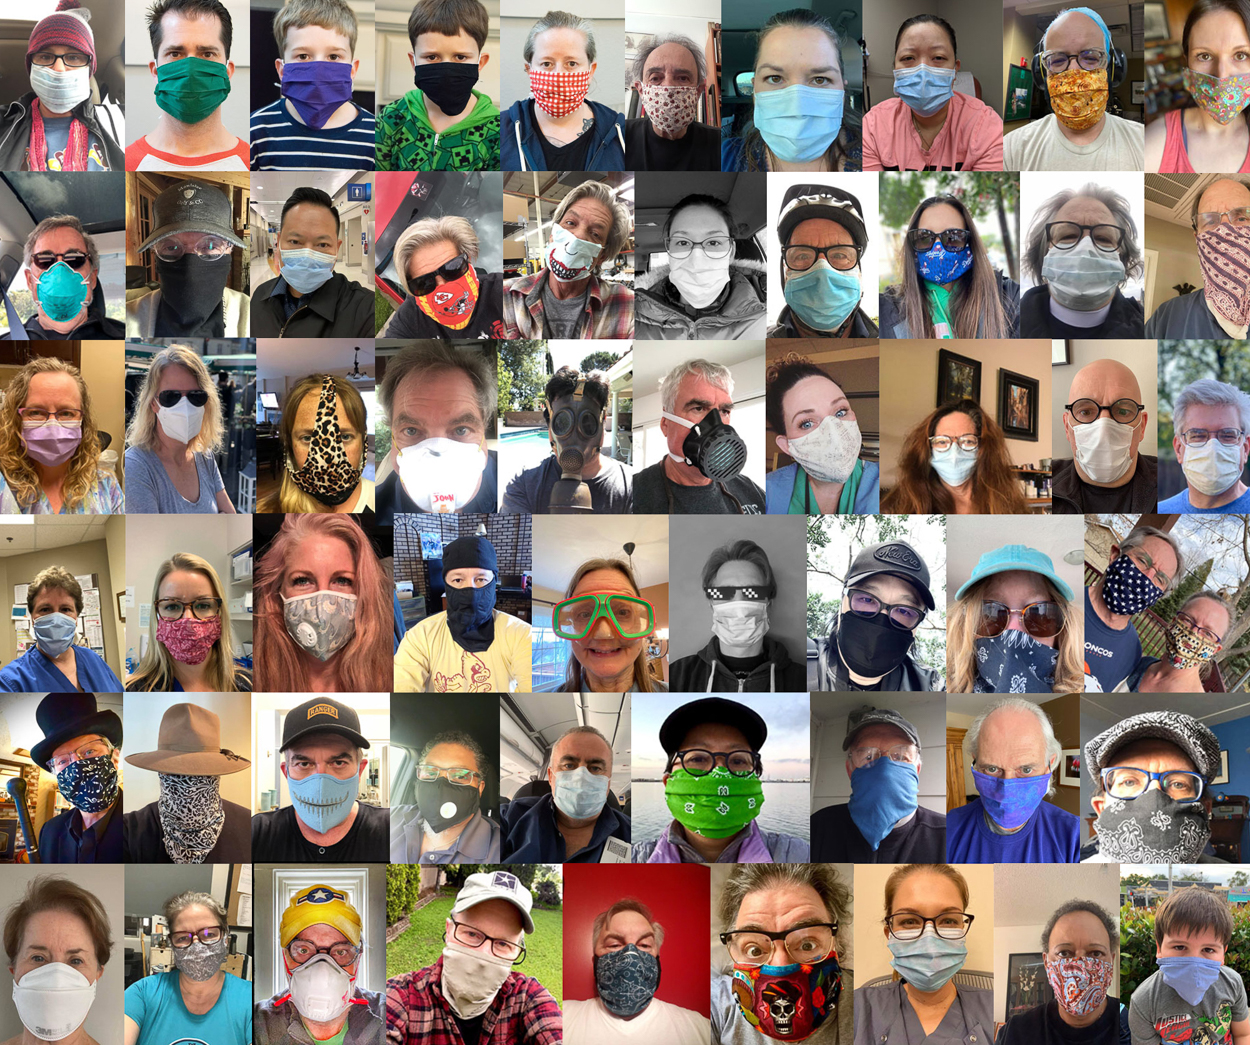 Collage of hundreds of Facebook followers wearing face masks who volunteered for this project during the COVID-19 pandemic. This image is a part of the COVID-19 Project.